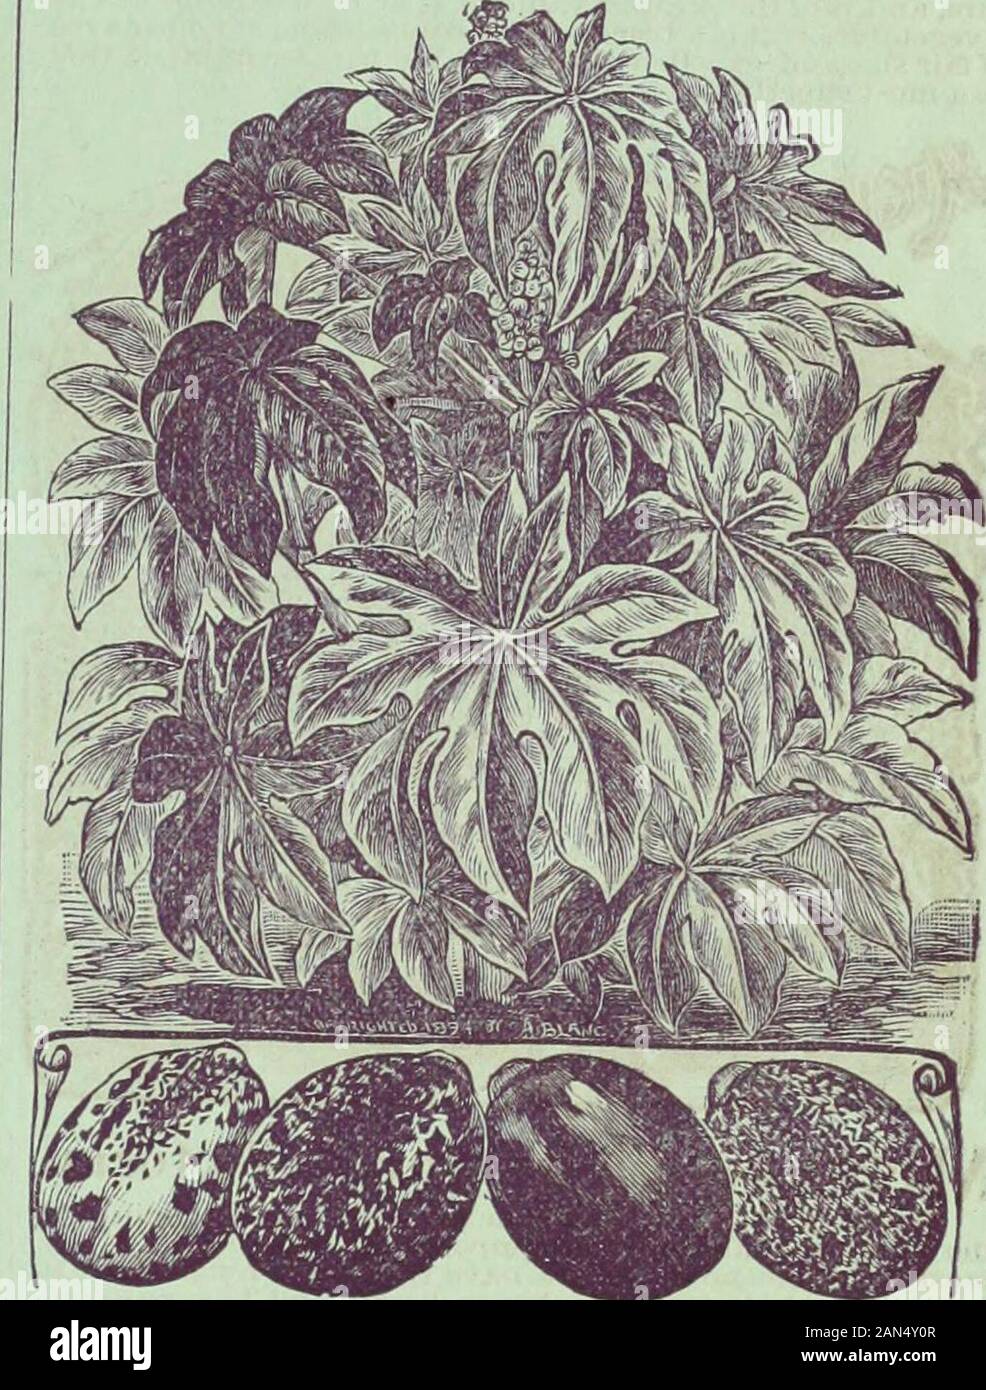 Childs' rare flowers, vegetables & fruits for 1895 . Escl^sct^oltzia Maritin^a. liU-Ai^H^ whitish grey foliage, finely cutandfem like, and large light canary colored blossoms with deen snotaat base of each petal. Splendid new garden flower Pkt 10c. Ricii^iis Zapzibapei^sis. iF^i u several varieties of this superb new Ricinus allof which are characterized by extra large and handfiomileaves compact branching growth, forming a perfect nvmmid o/elegant foliage. Thesled are Veryl?|eaSd elch^^S^ Llit^r^r&n-dHL^ouli^^ 12 JOHN LEWIS CHILDS, FLORAL PARK, QUEENS CO., N. Y. Stock Photo